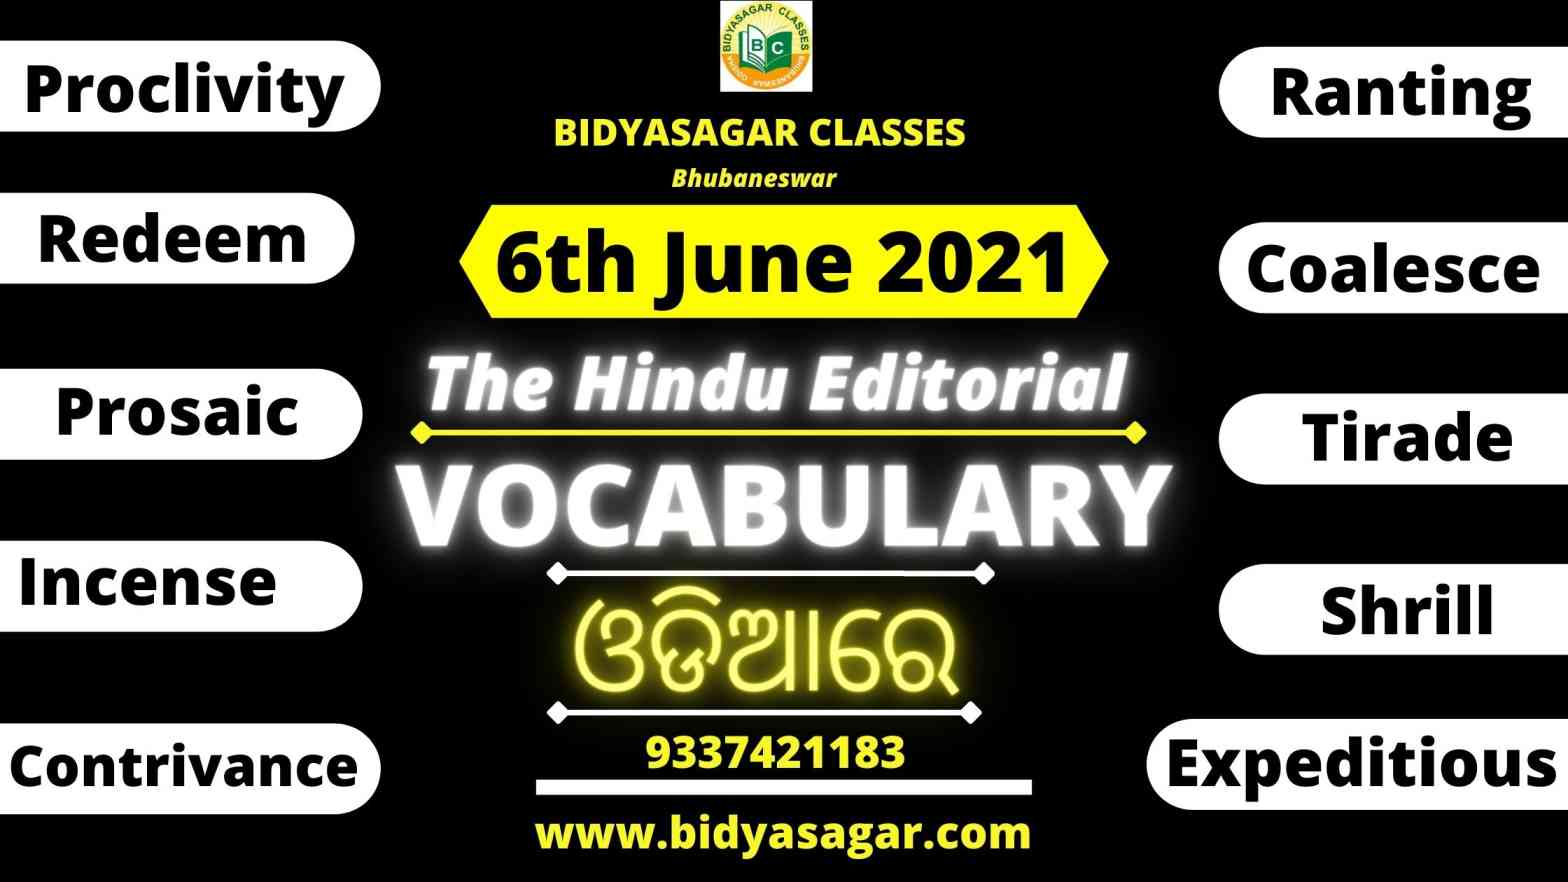 The Hindu Editorial Vocabulary of 6th June 2021